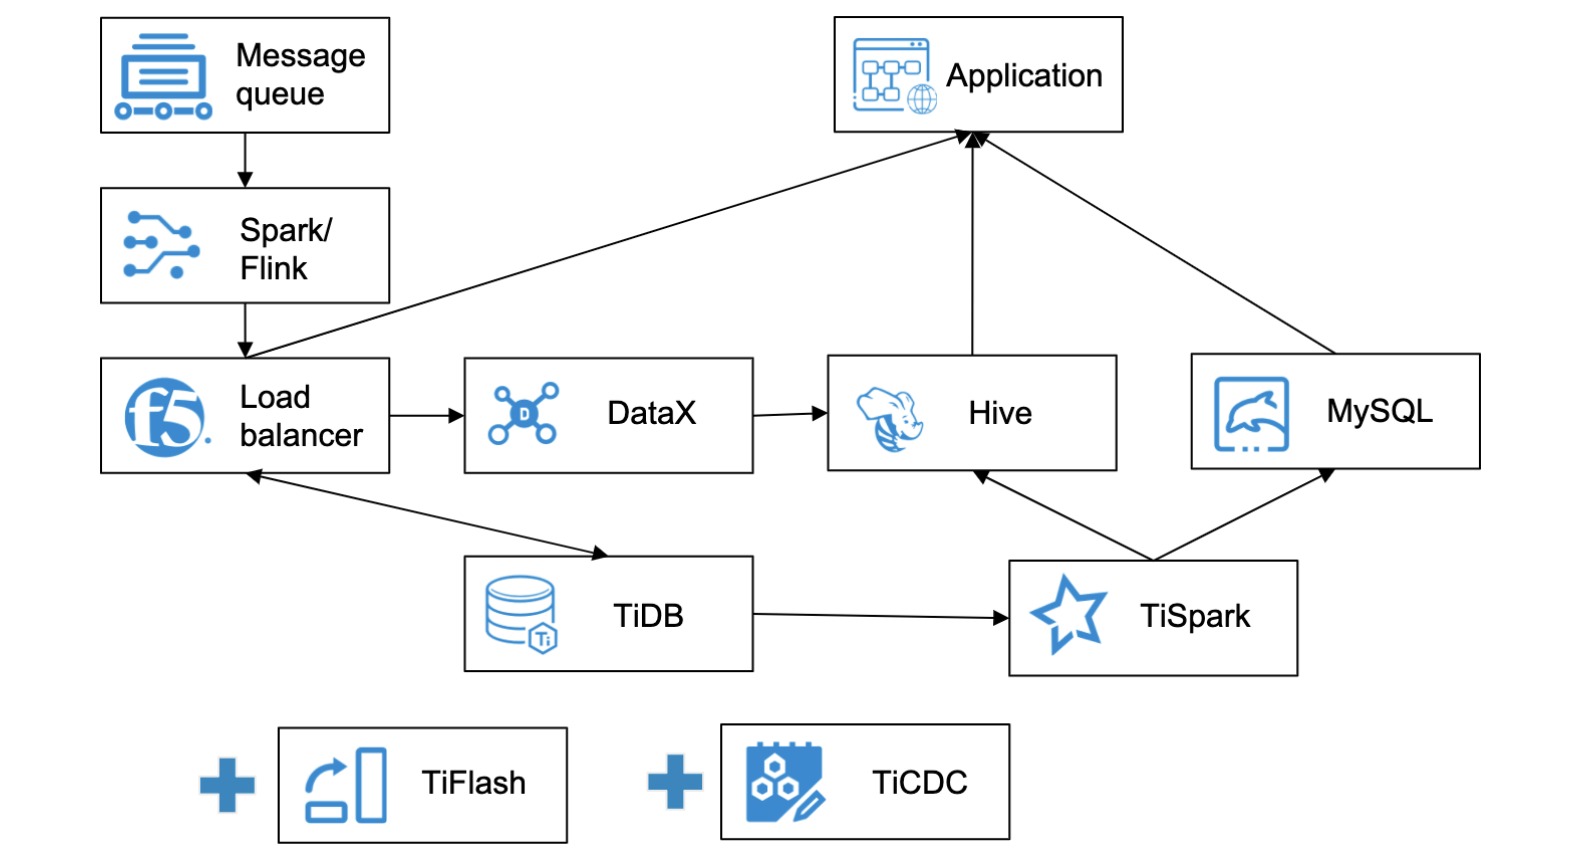 ZTO new architecture with TiFlash and TiCDC